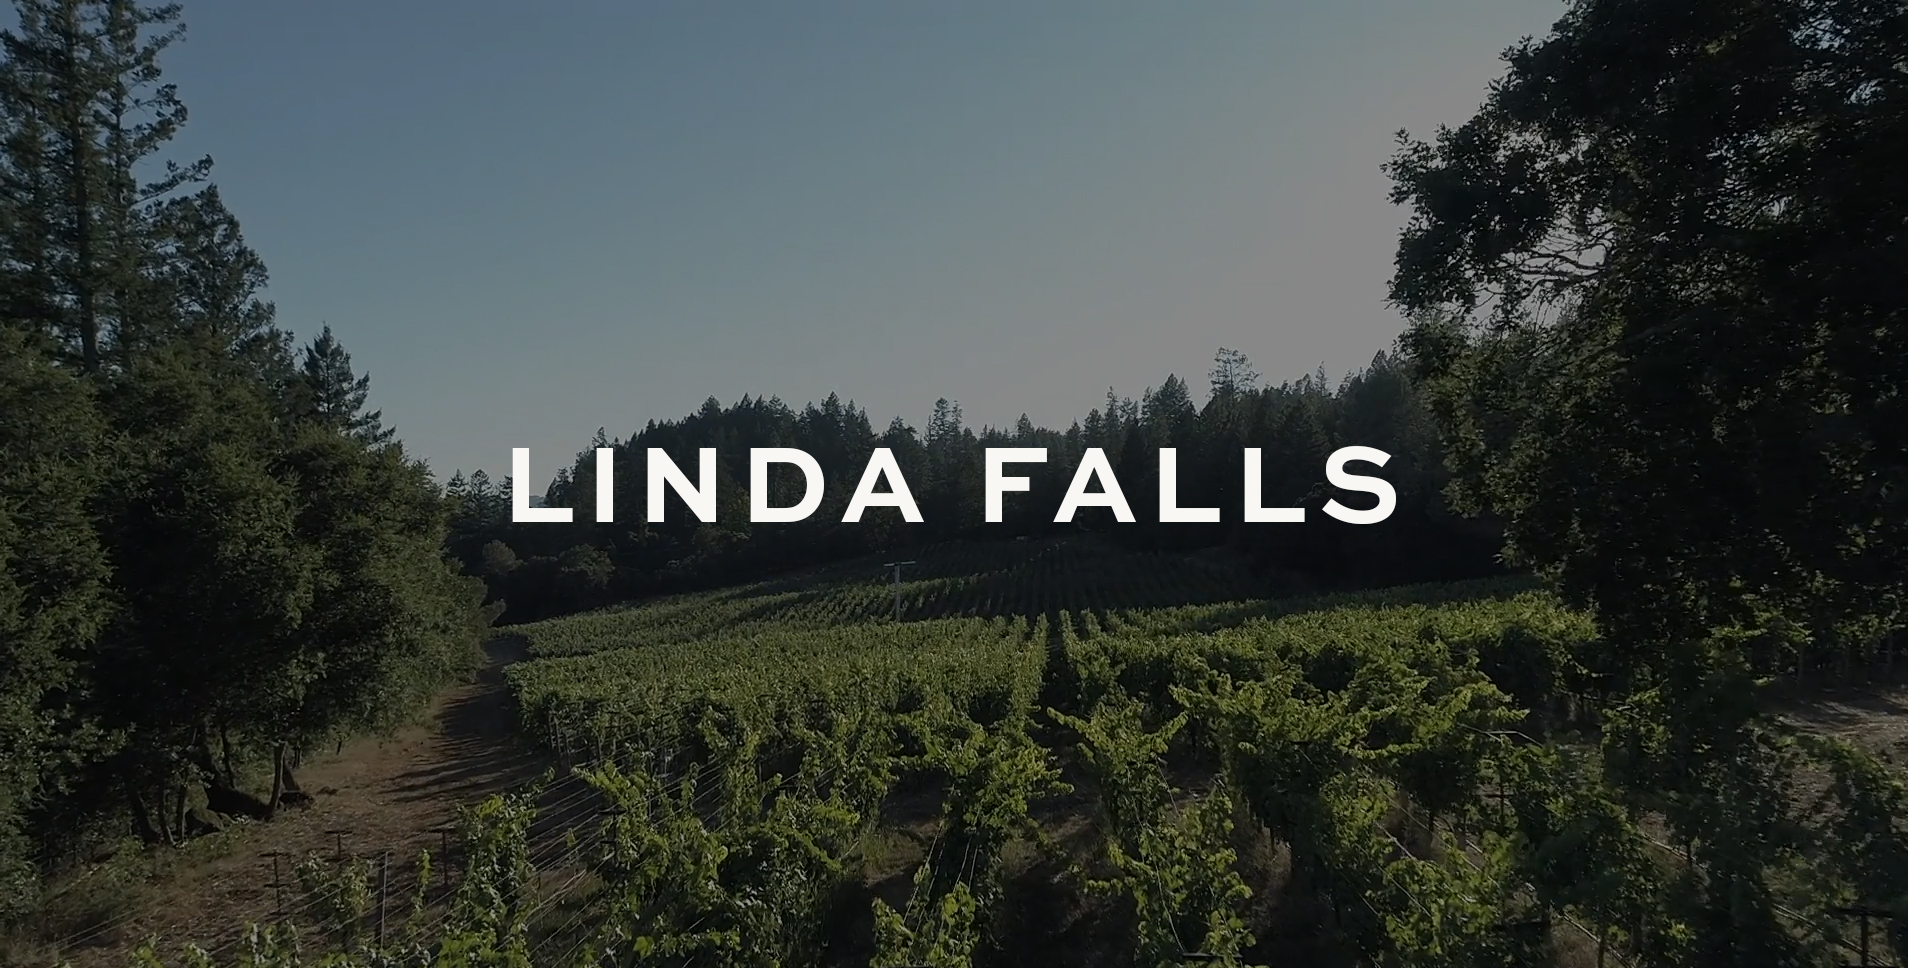 vineyard rows with blue sky with text Linda Falls Superimposed